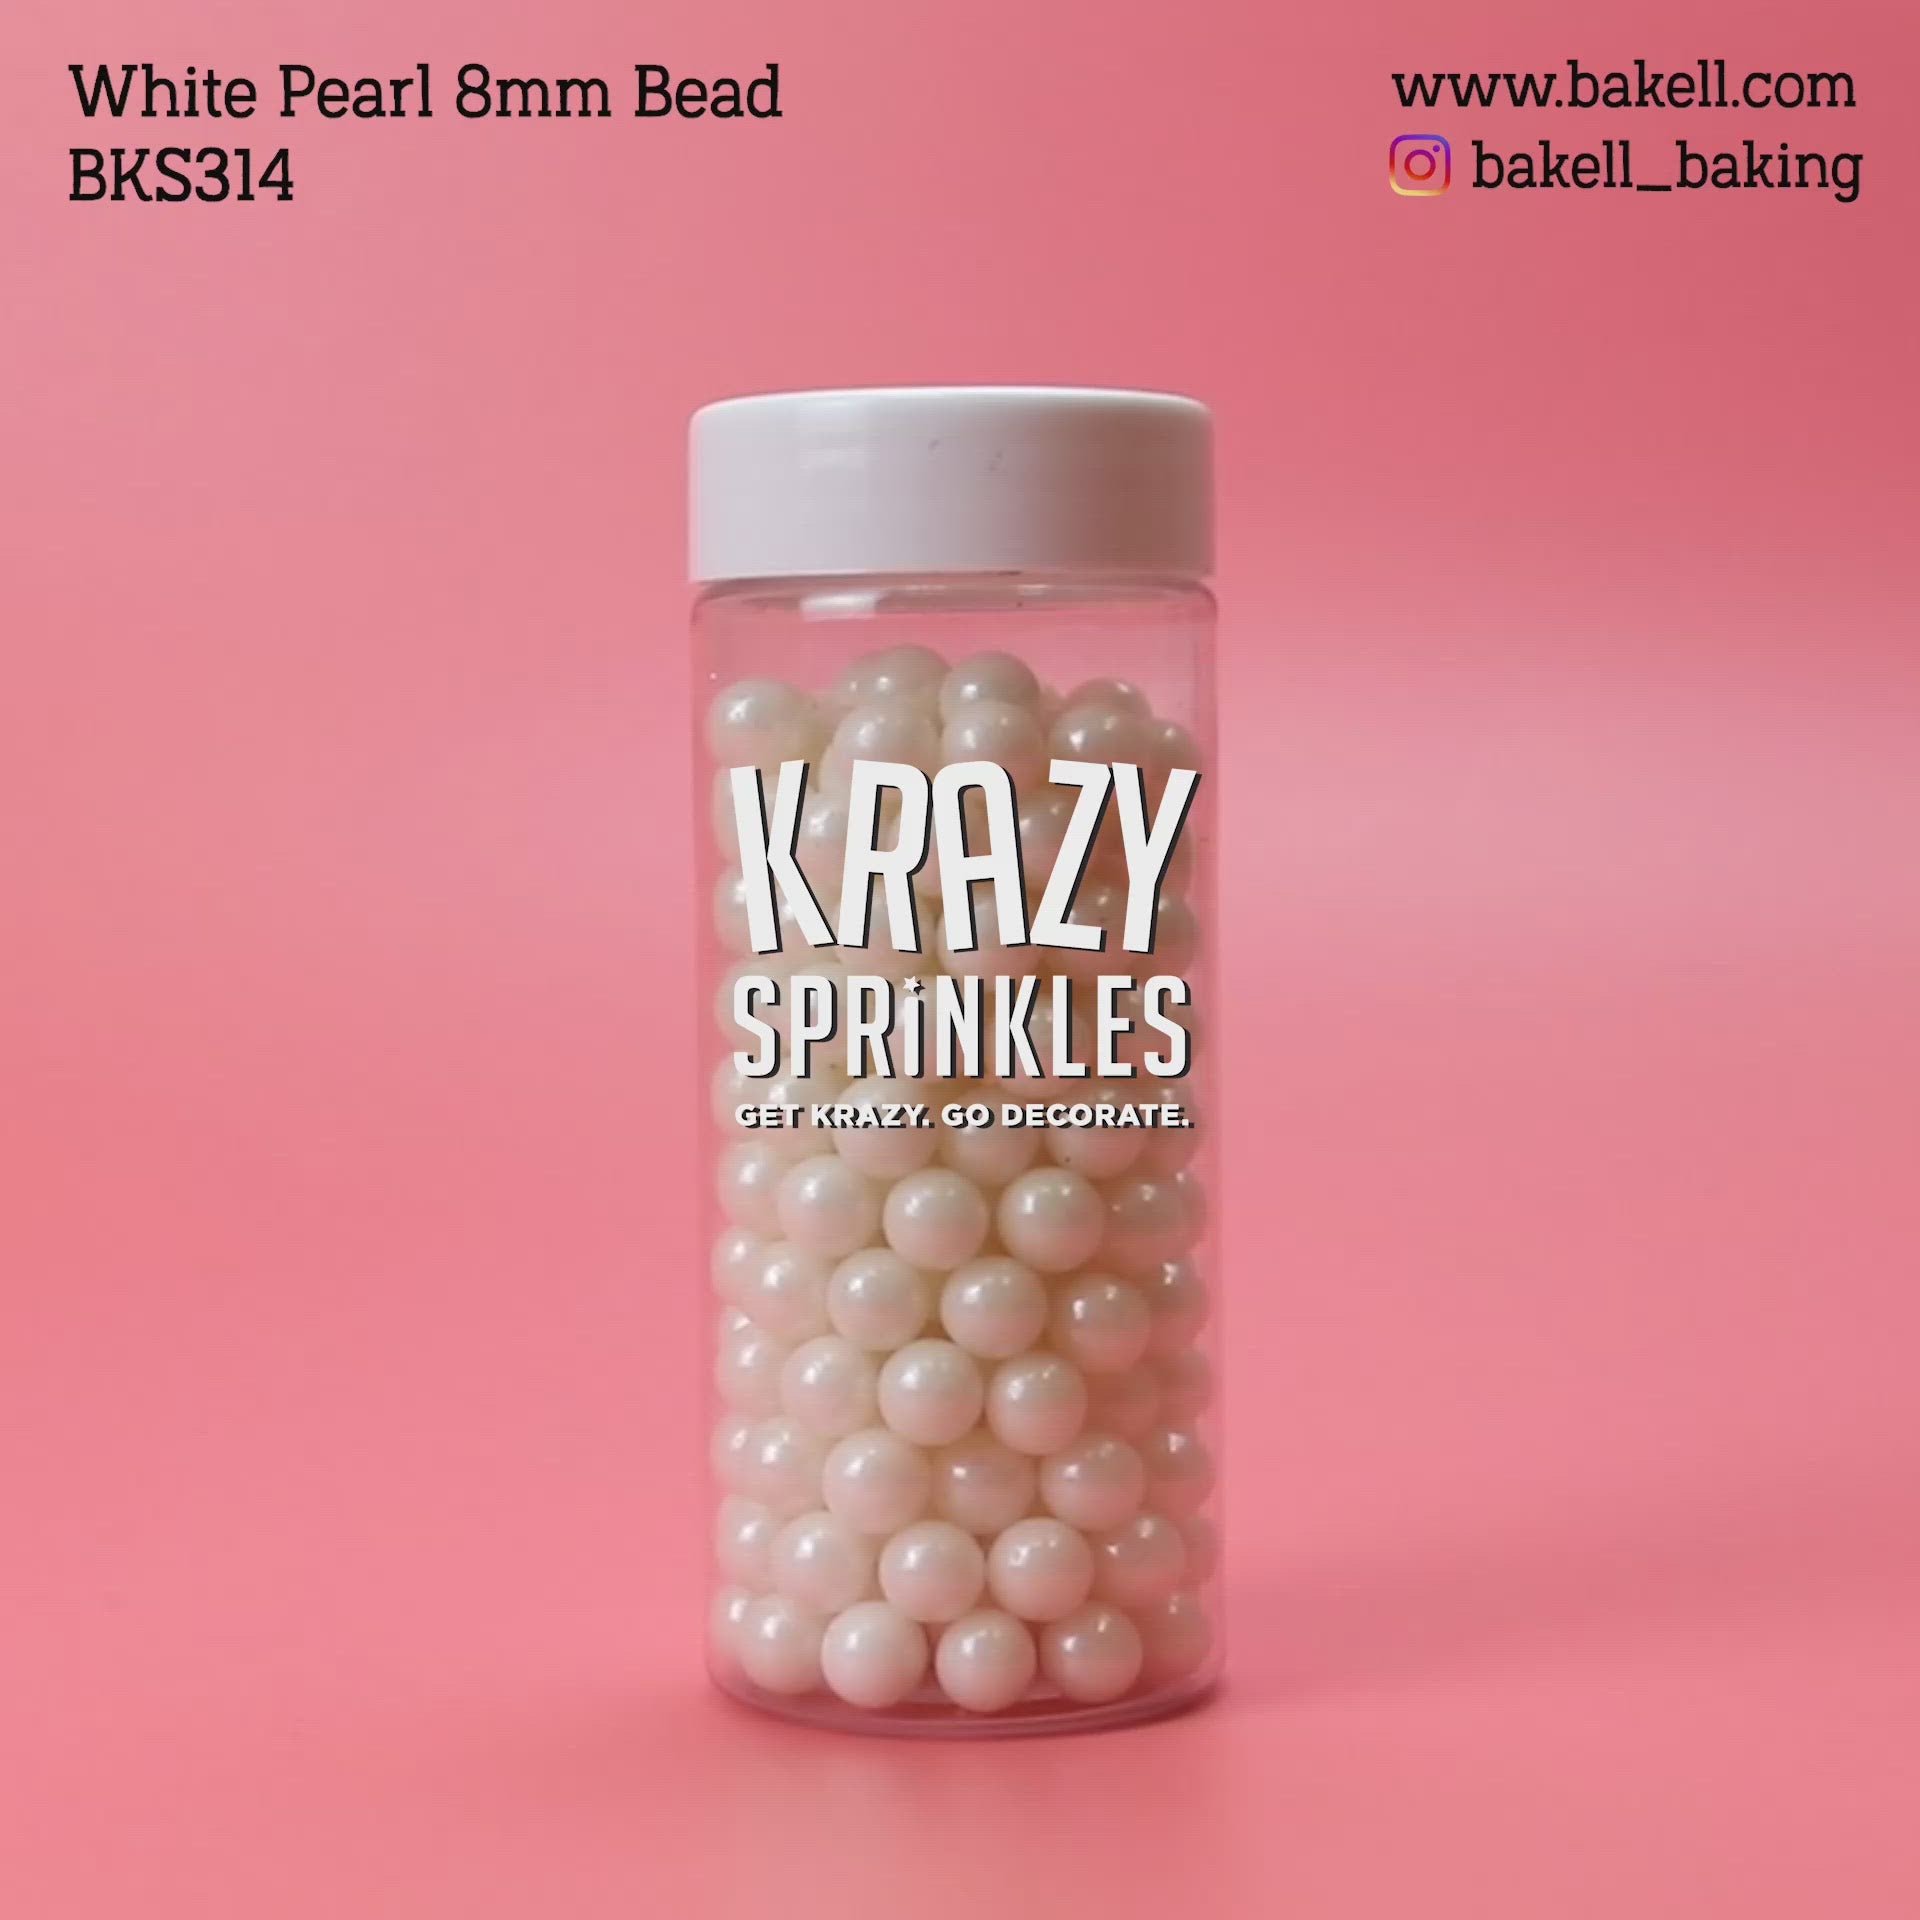 White Pearl 8mm Beads